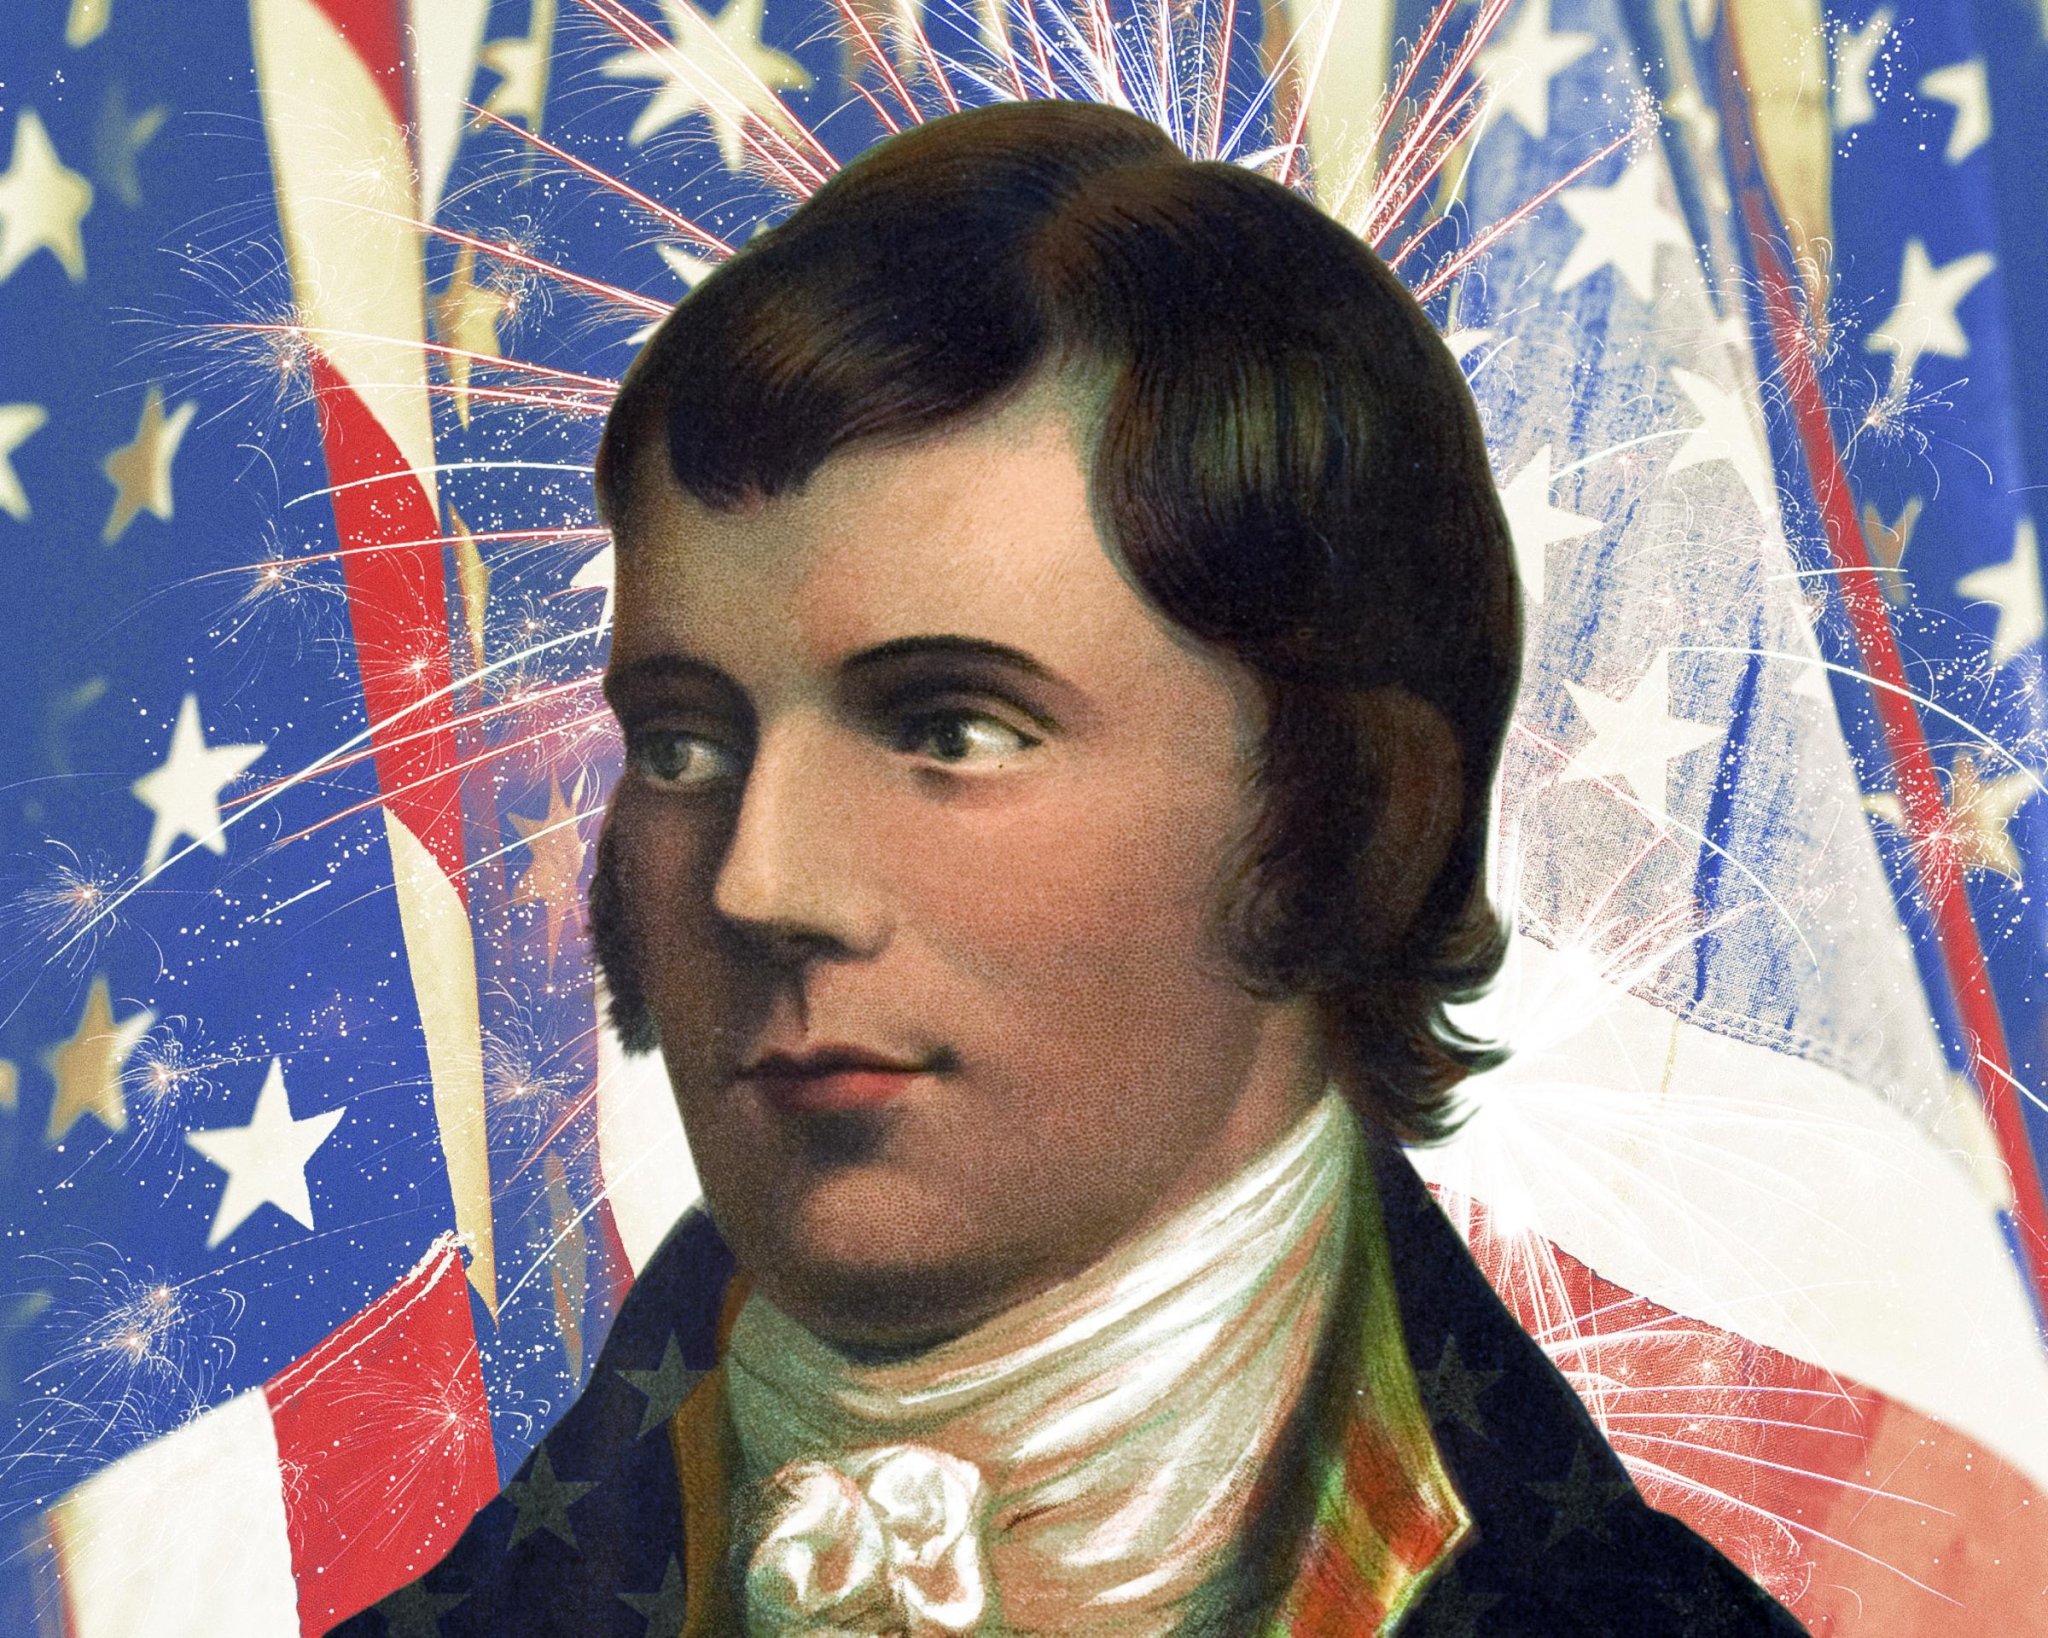 Robert Burns and his influence on prominent figures in America’s history